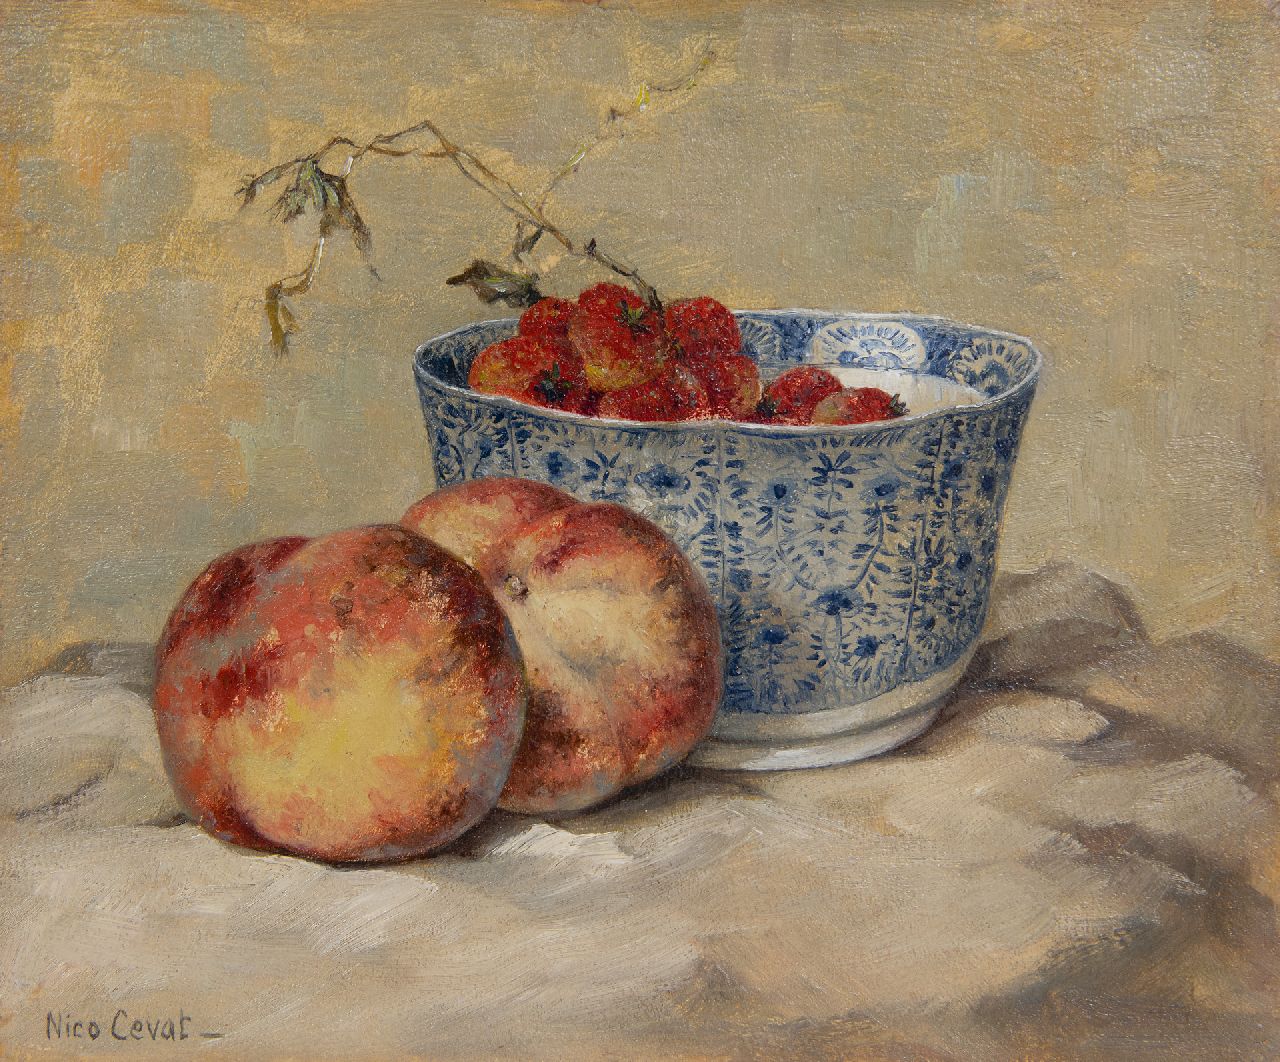 Nico Cevat | Still life with peaches and strawberries, oil on panel, 23.4 x 28.0 cm, signed l.l.